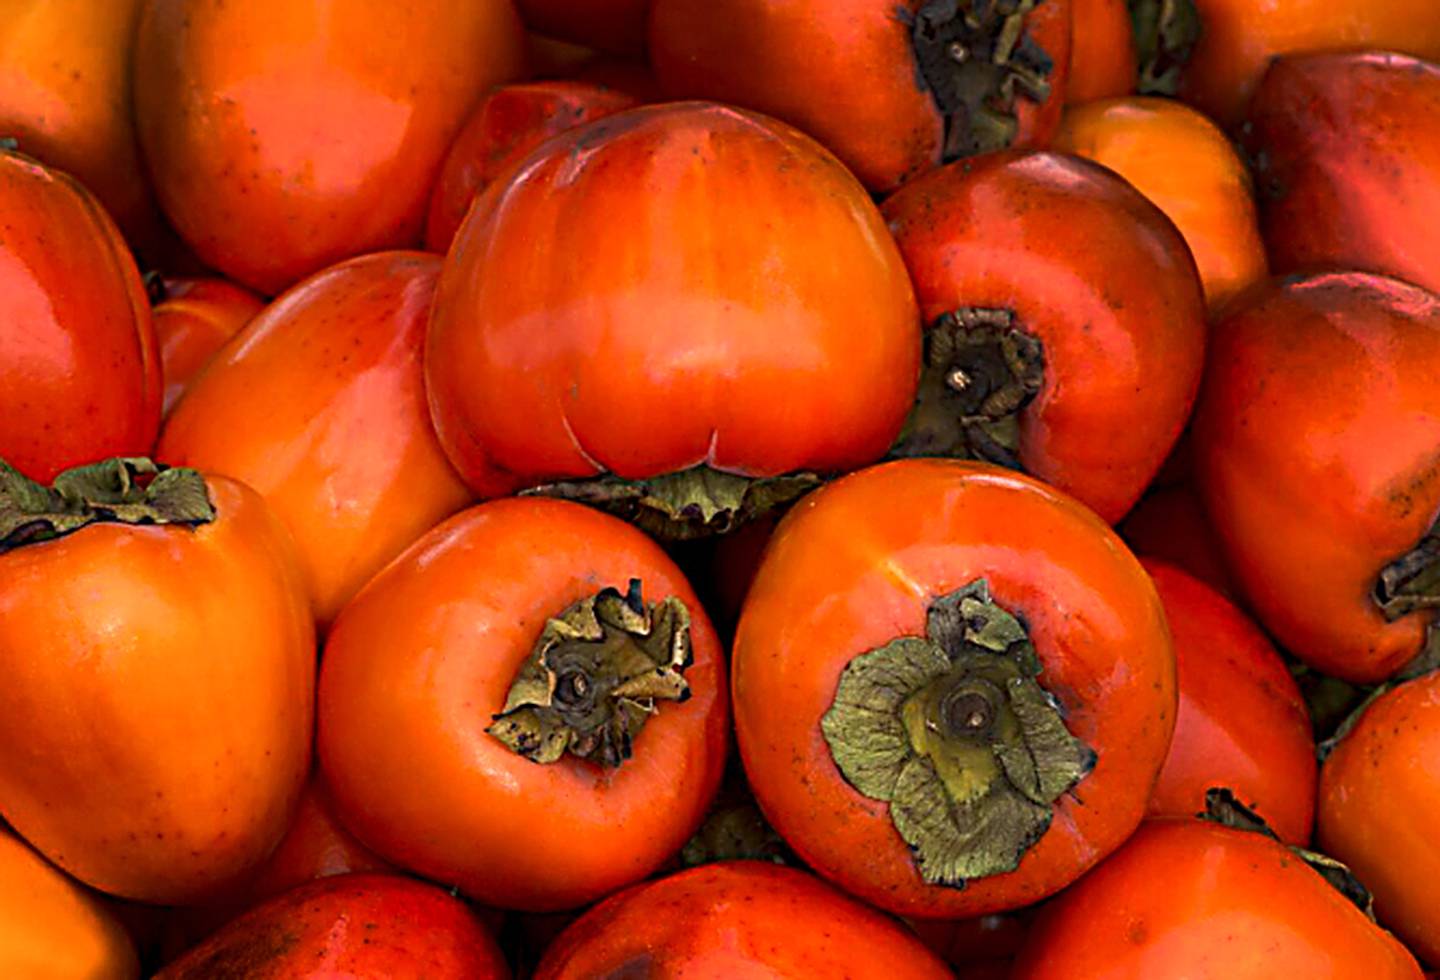 The persimmon could become the State fruit of Maryland.